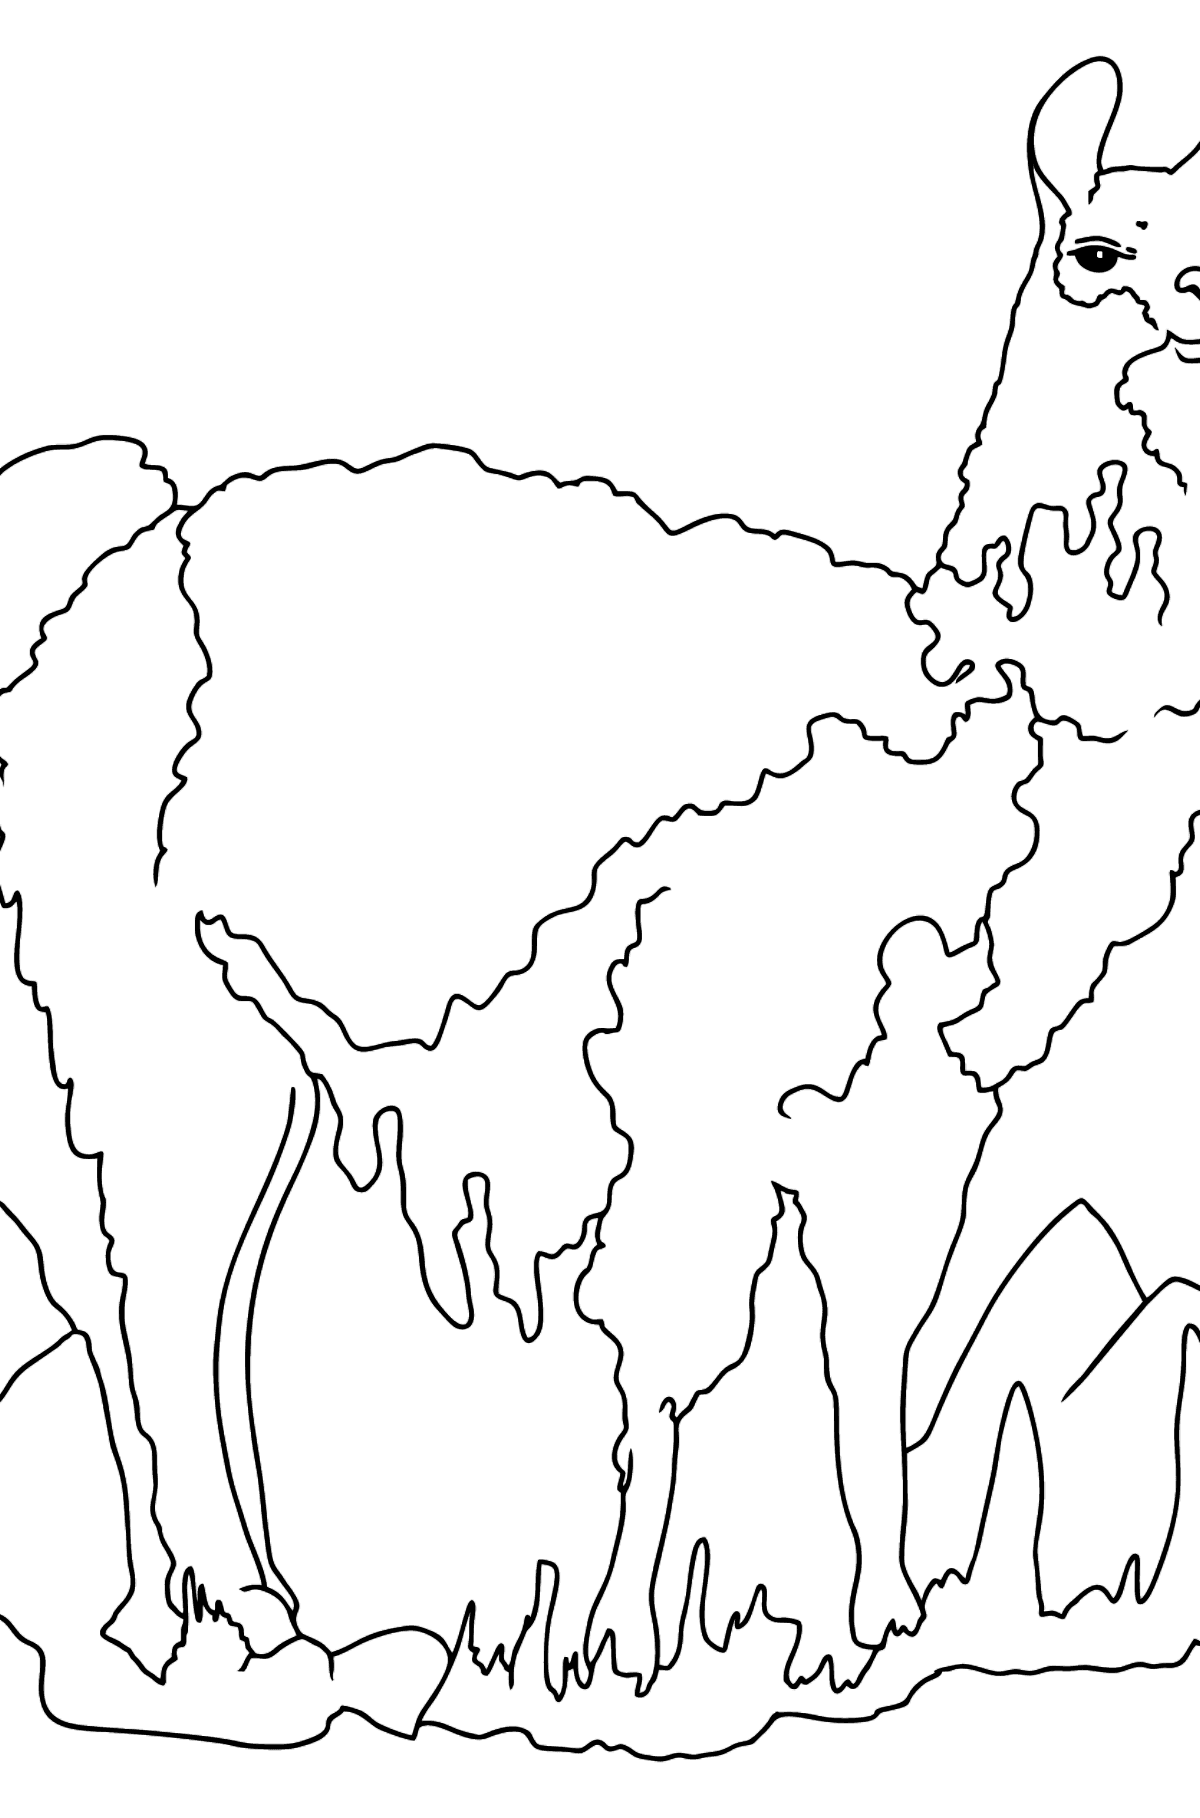 Coloring Page - A Panda is Looking into the Distance - Coloring Pages for Kids